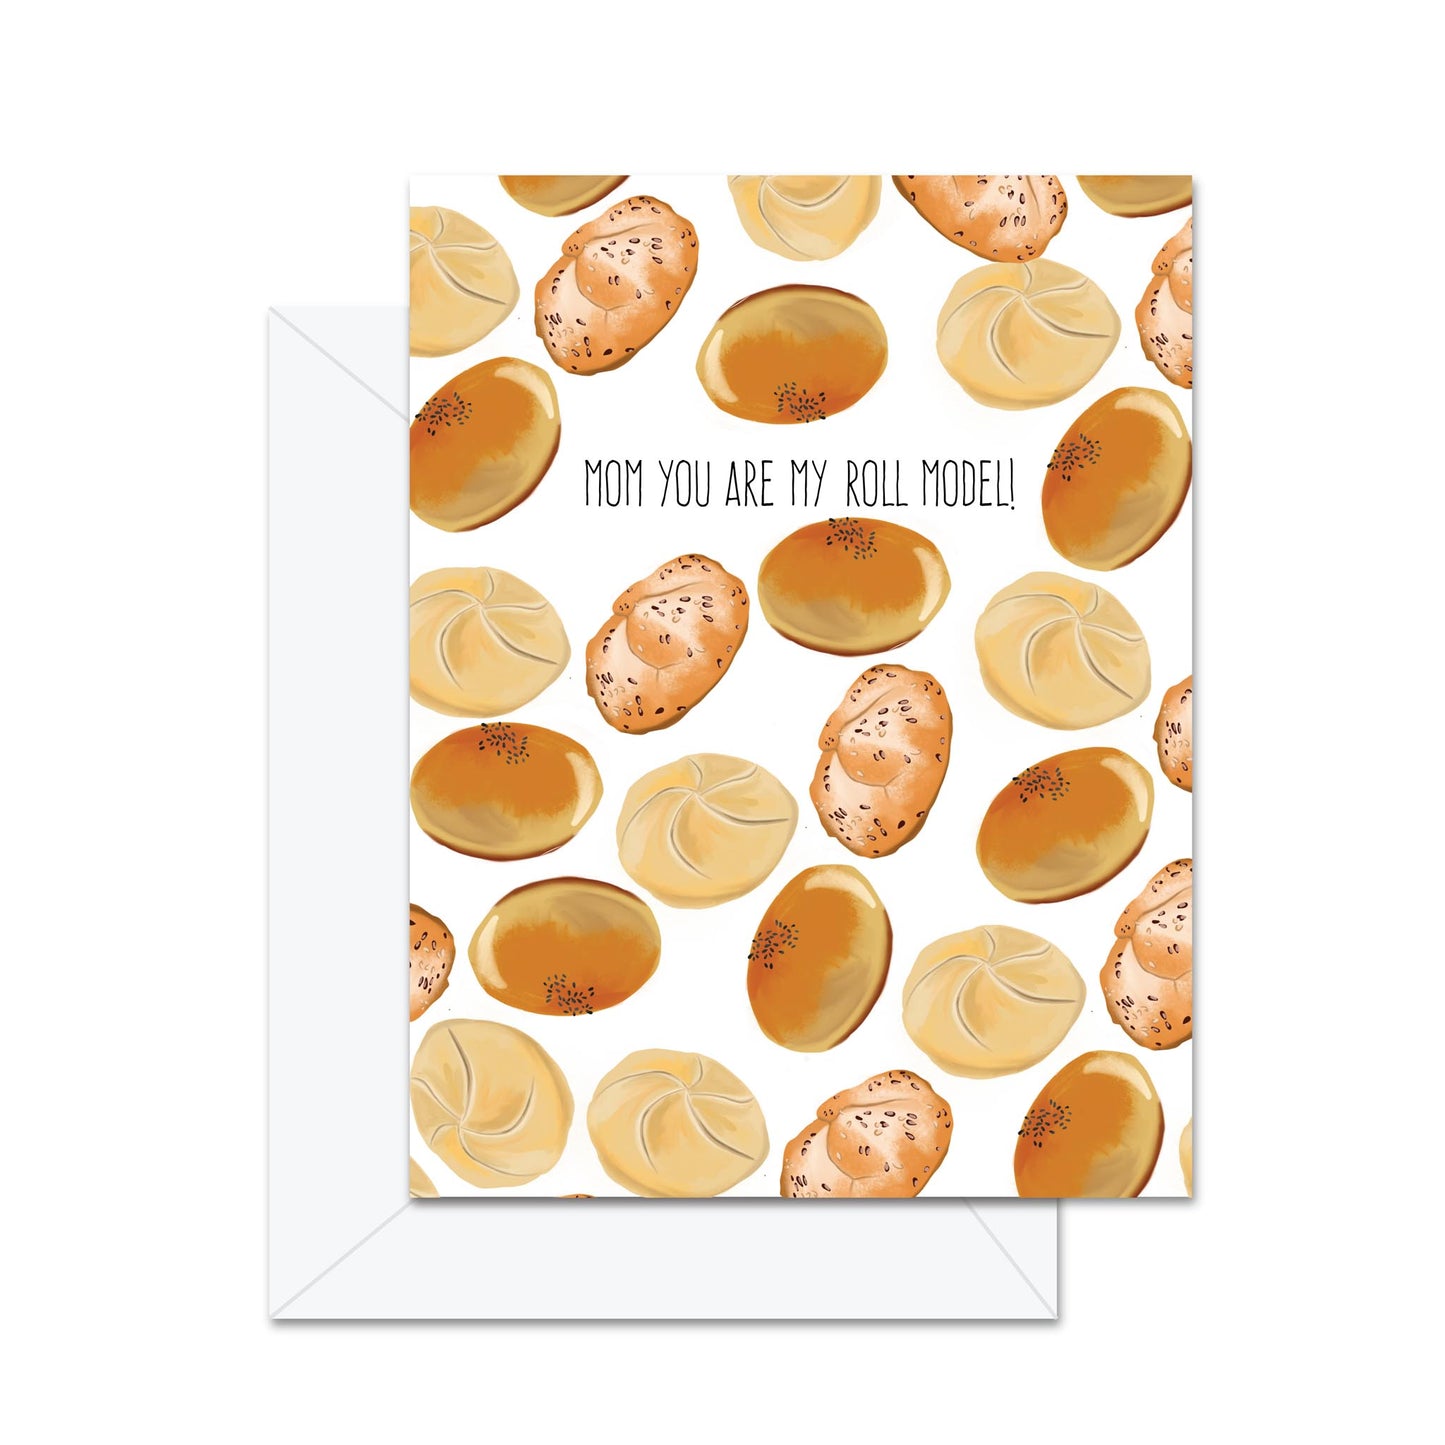 Mom, You Are My Roll Model! - Greeting Card